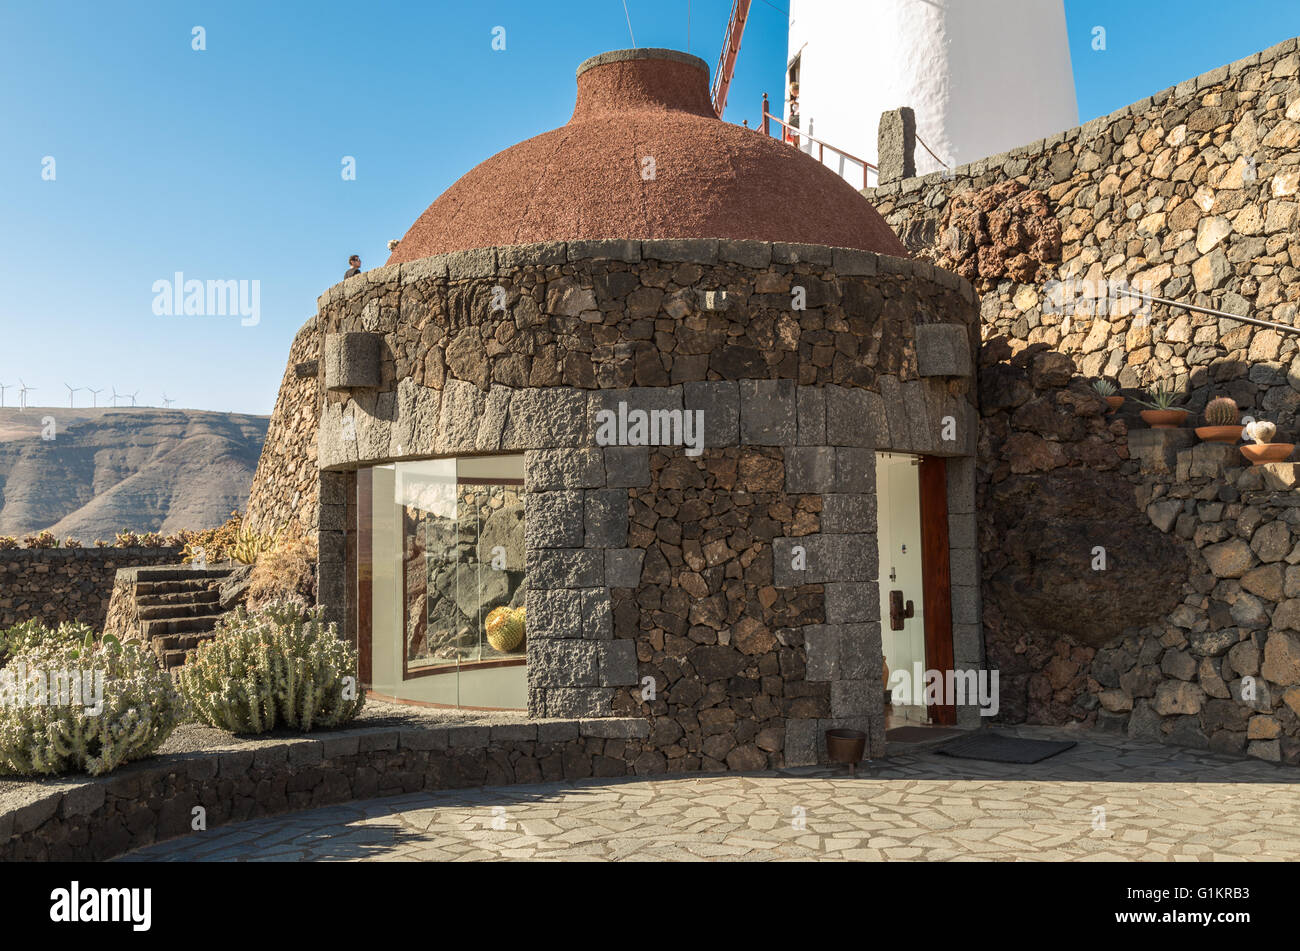 Entrance to the stairwell at the Lanzarote Cactus Garden, overlooked by a windmill. Designed by César Manrique. Stock Photo